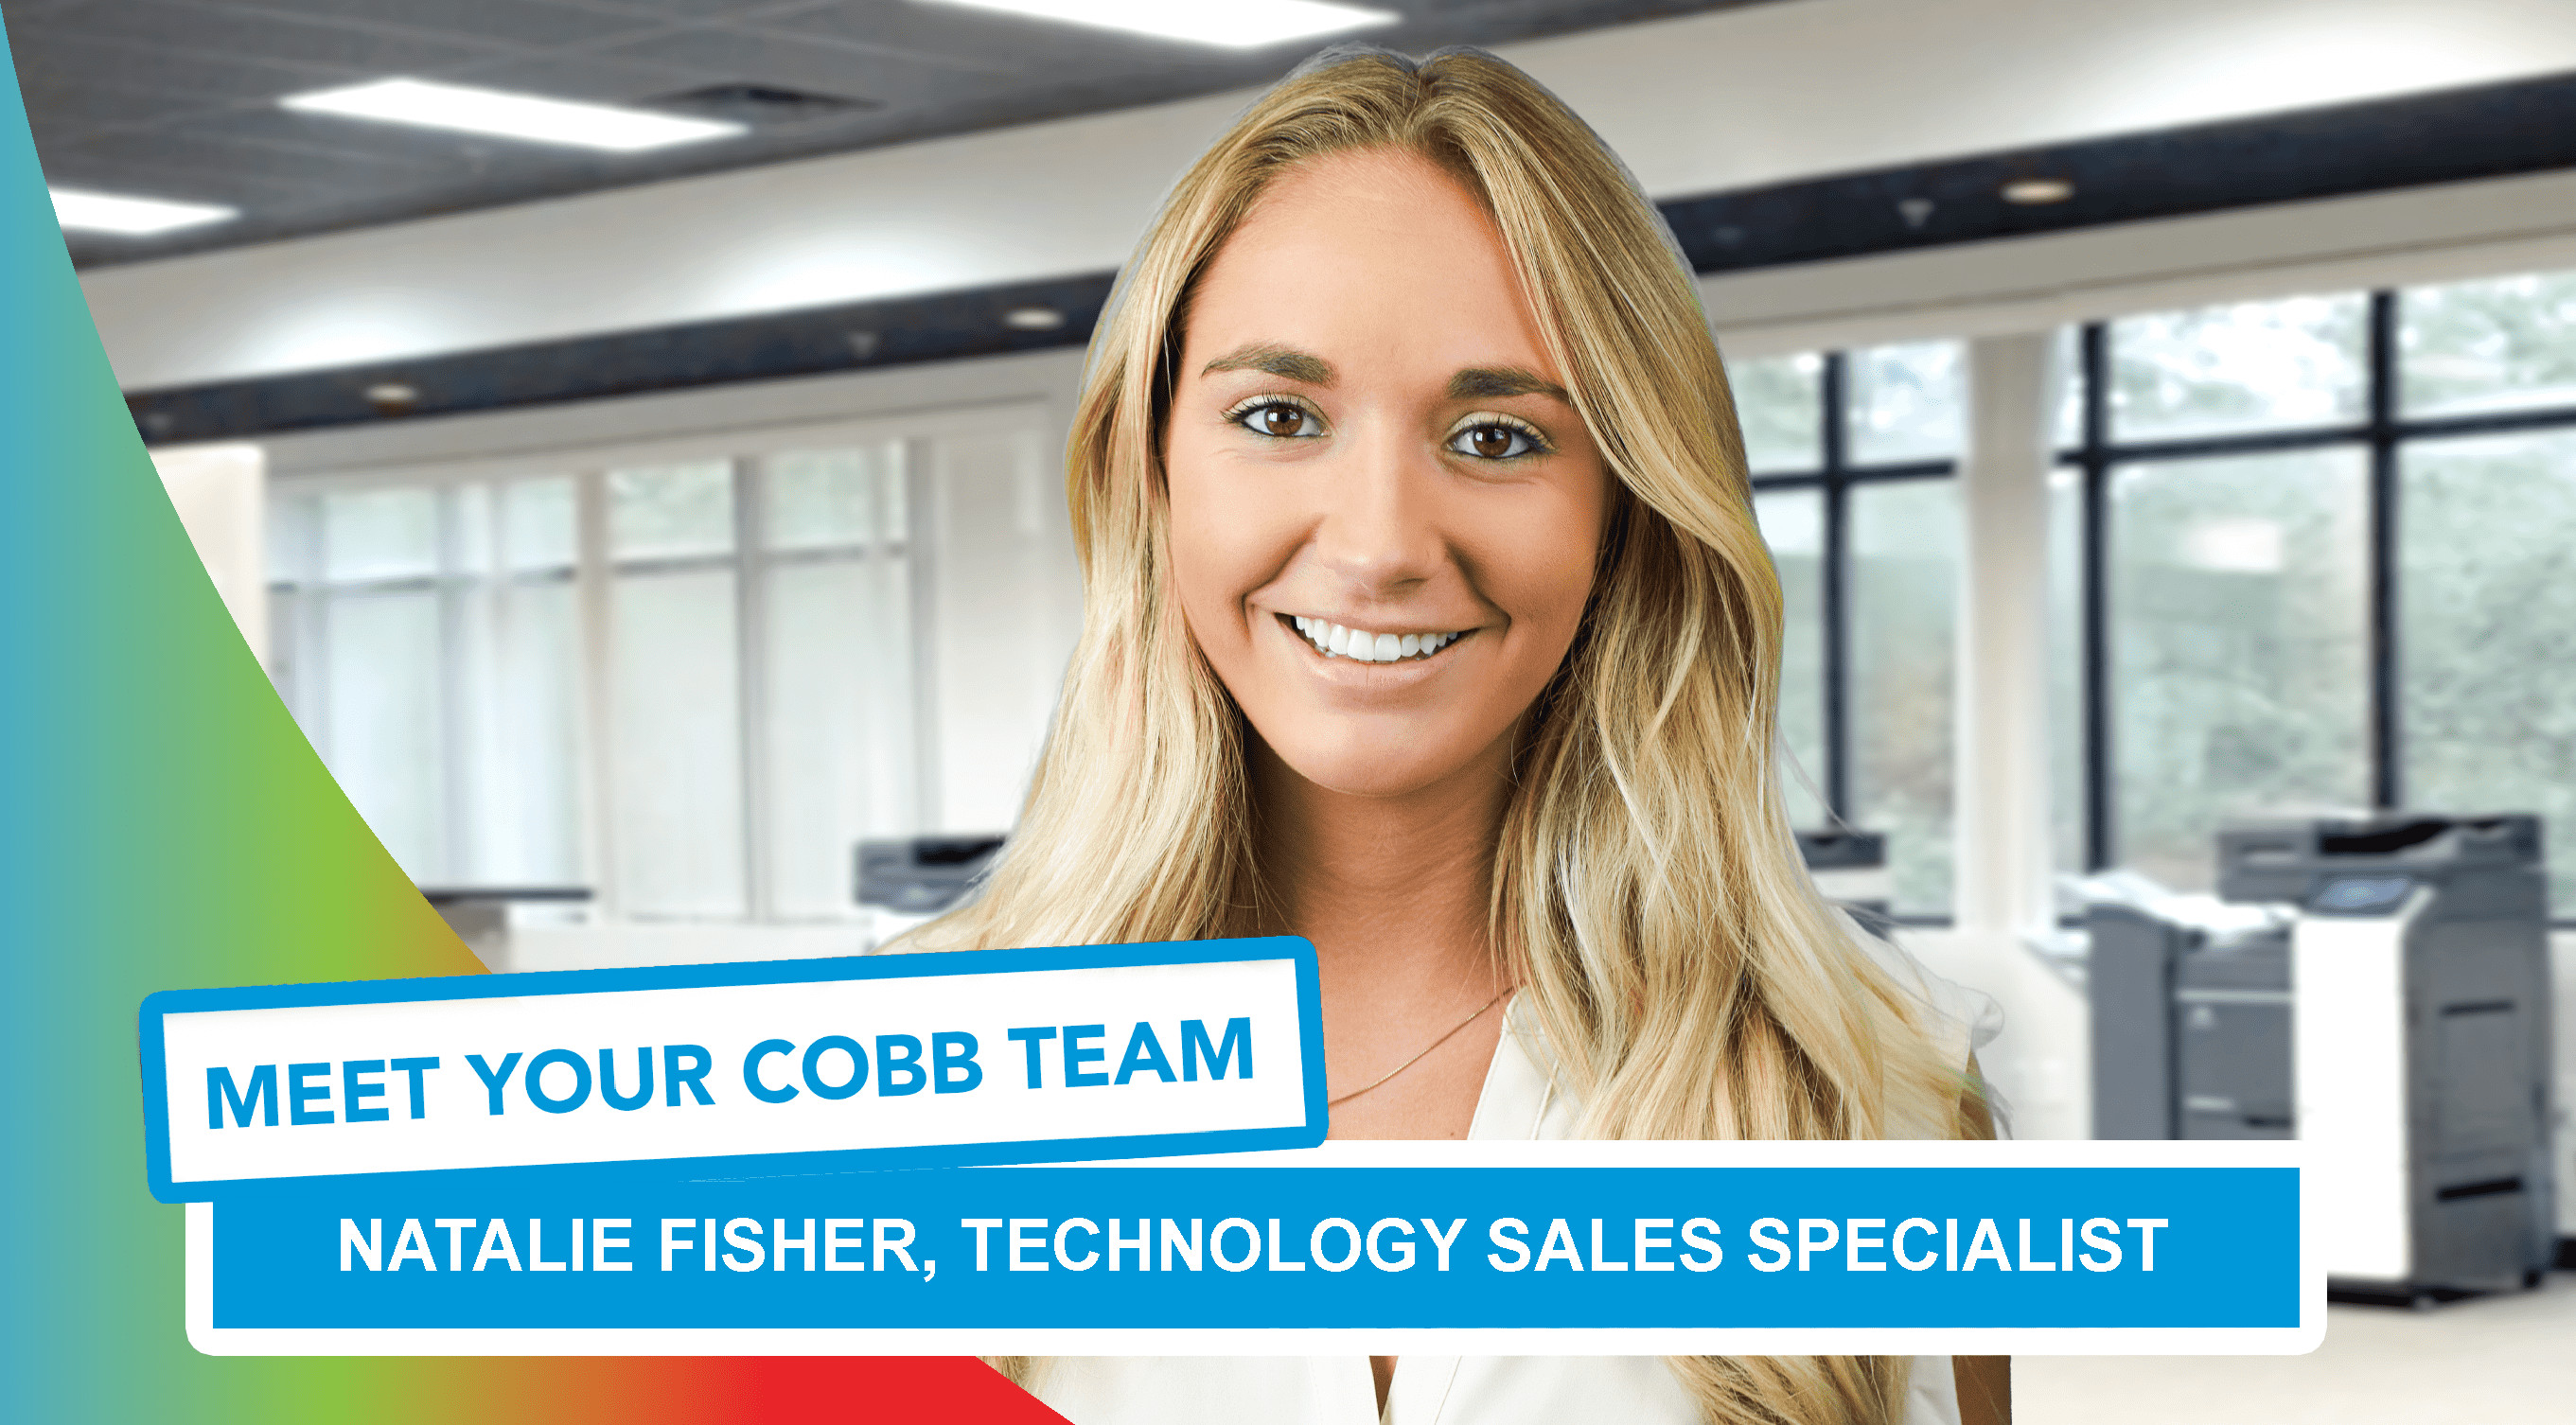 Natalie Fisher, Technology Sales Specialist at Cobb Technologies